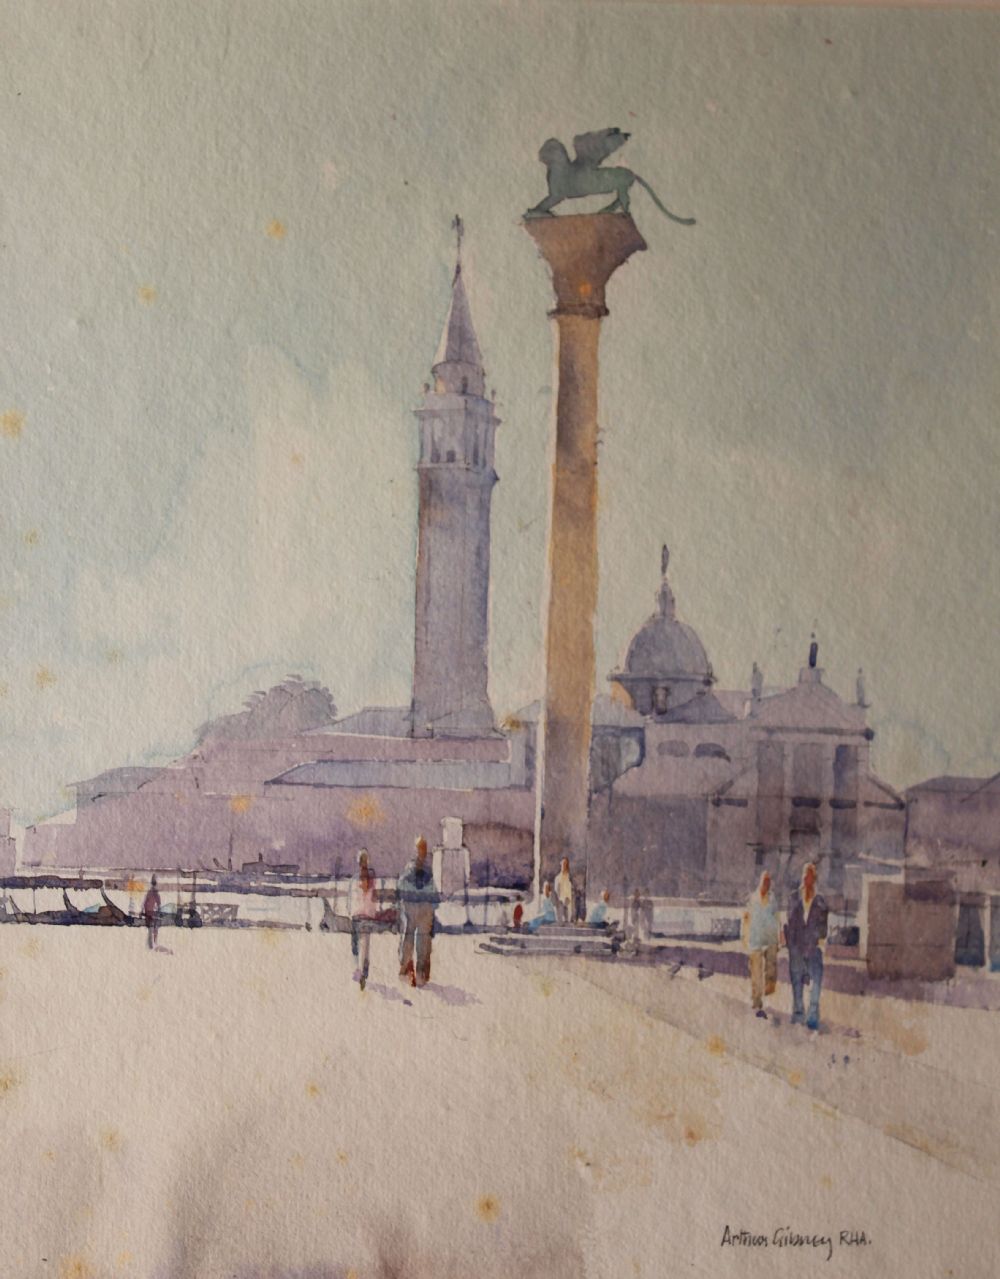 VENETIAN QUAYSIDE by Arthur Gibney  at deVeres Auctions